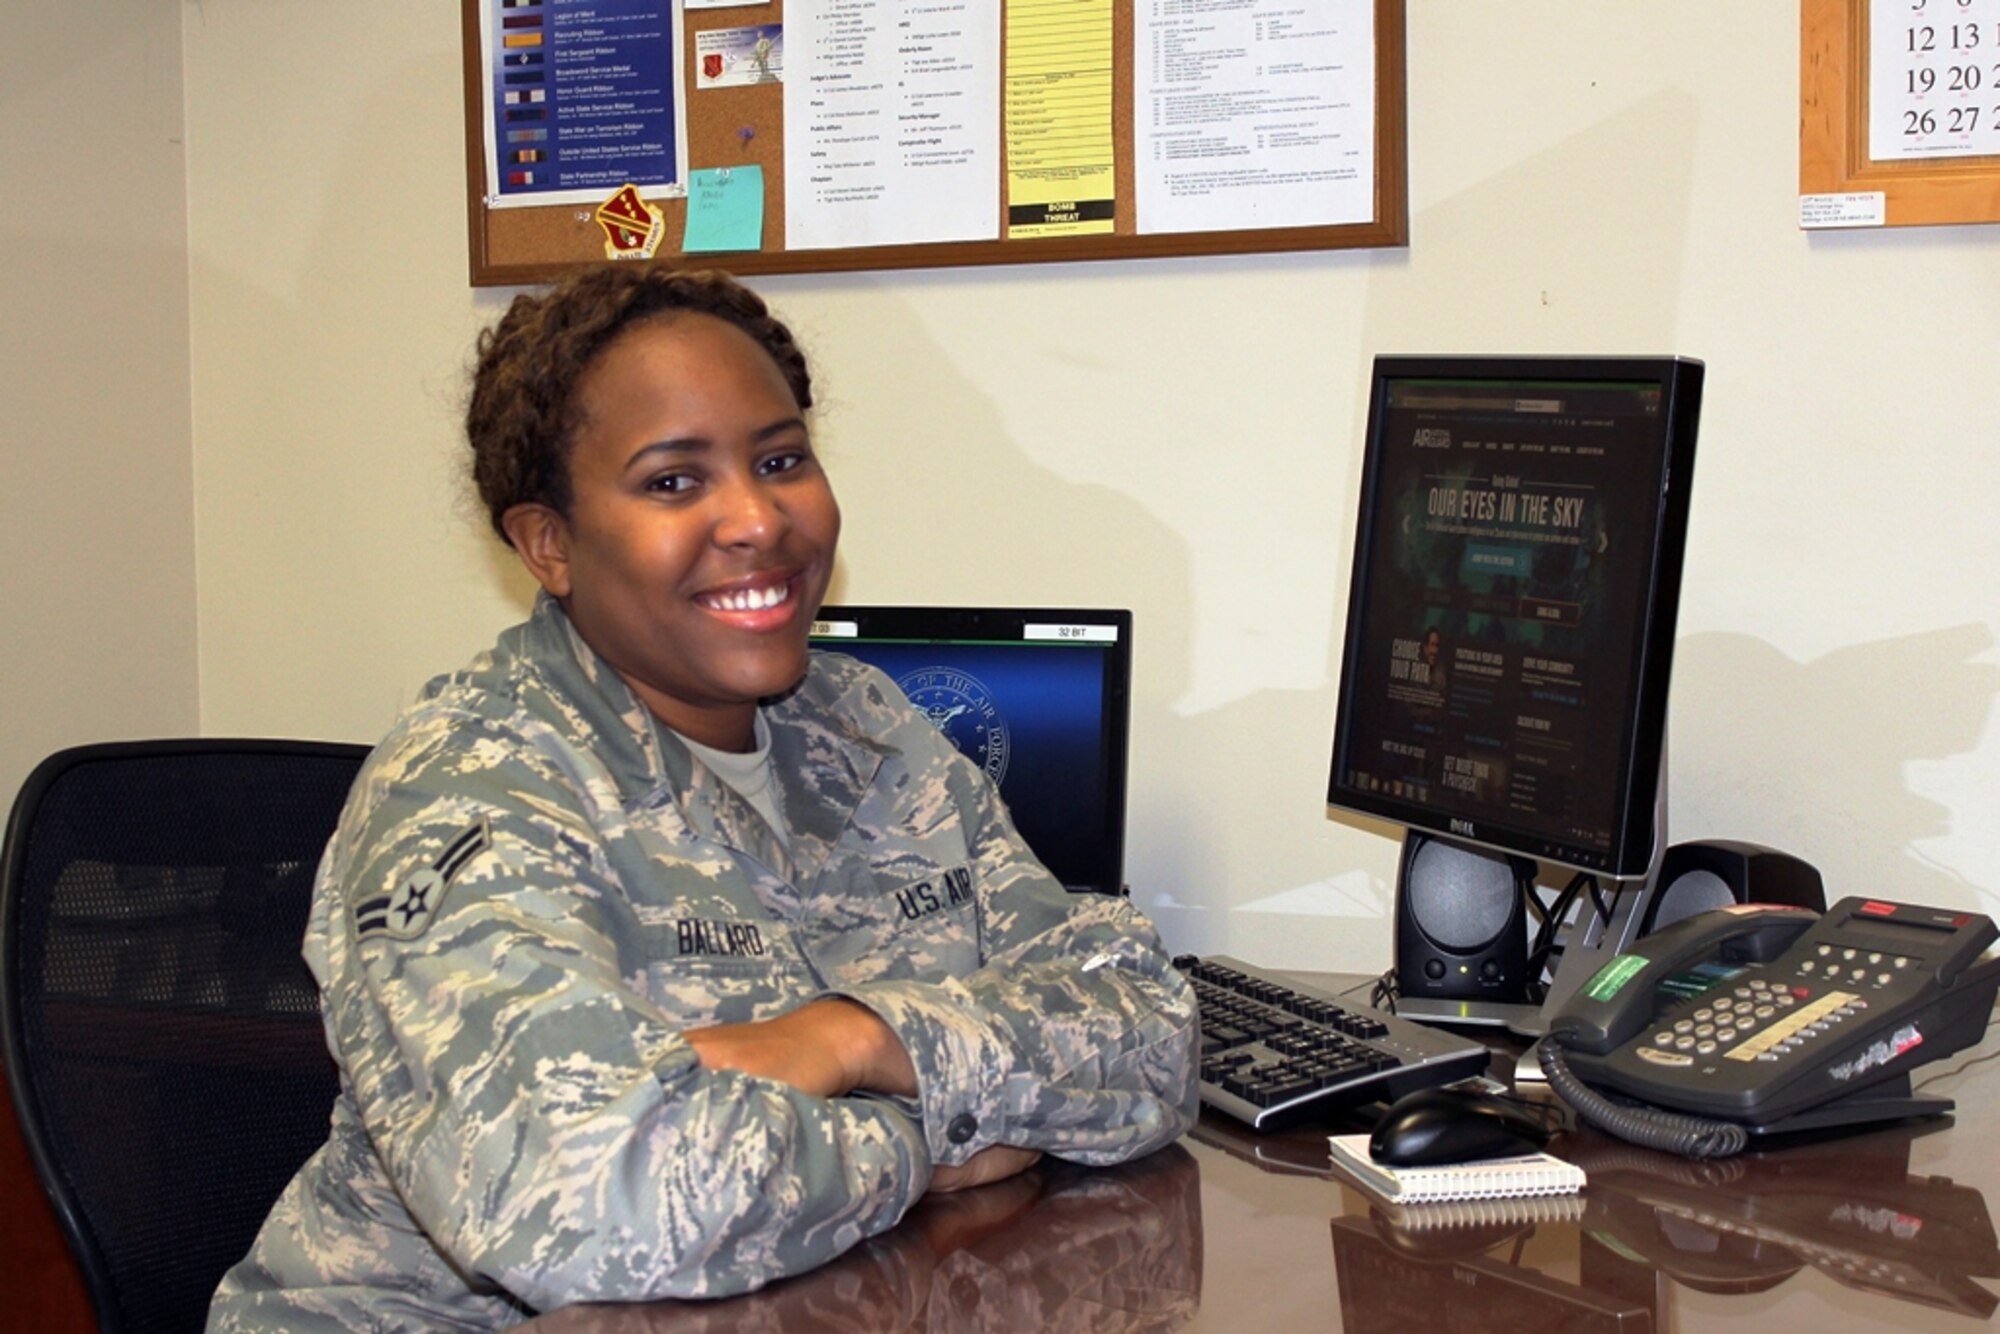 151027-Z-VA676-072 -- Airman 1st Class Kyra Ballard sits in the orderly room of the 127th Wing headquarters at Selfridge Air National Guard Base, Oct. 27, 2015. Ballard said she enlisted in the Air National Guard to create an opportunity for herself. “Joining the Air Force is probably the best decision I have made in my life, so far,” she said. (U.S. Air National Guard photo by Tech. Sgt. Dan Heaton)